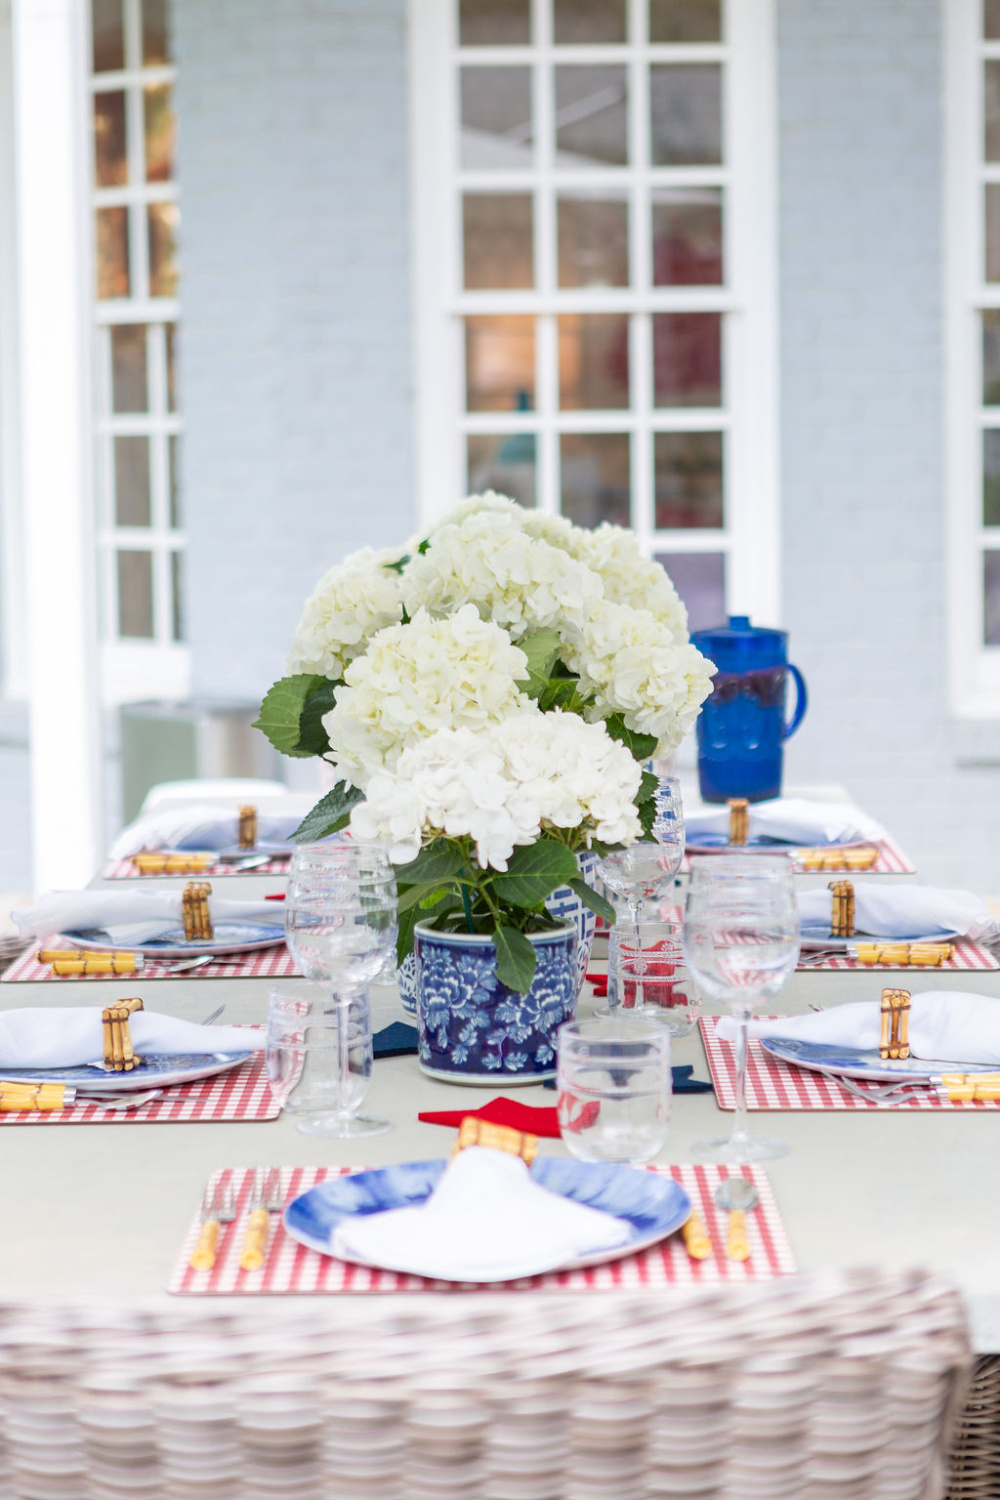 @aliciawoodlifestyle - 4th of July tablescape with classic Americana and gingham. #4thofjulytablescape